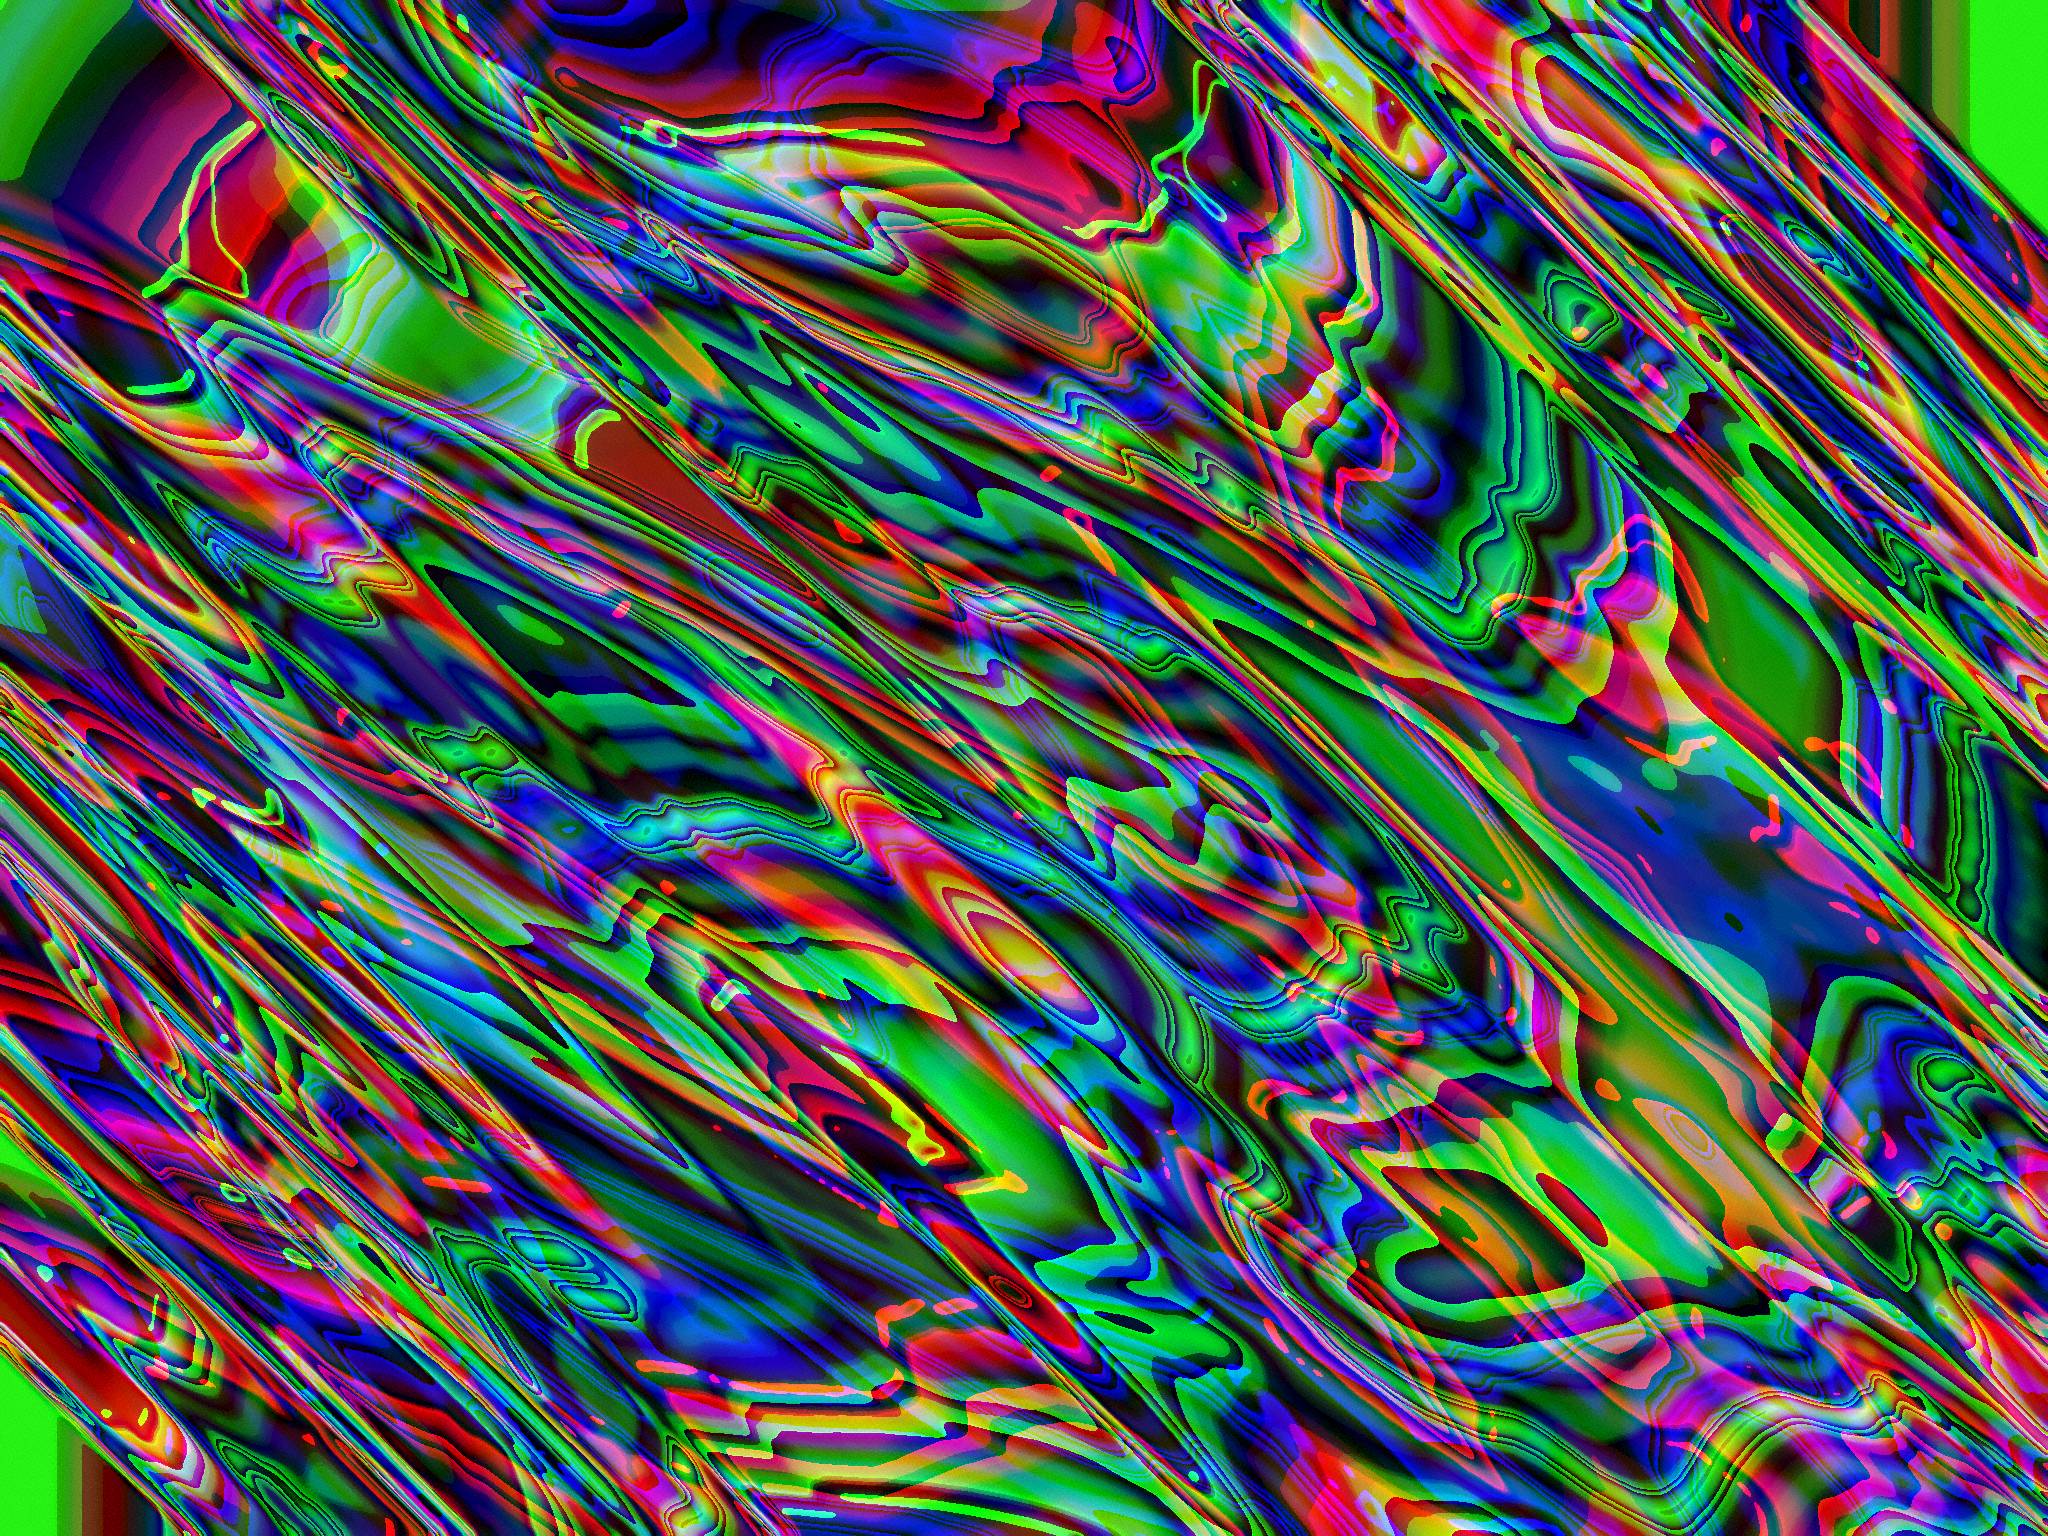 Trippy Wallpaper Backgrounds - Wallpaper Cave